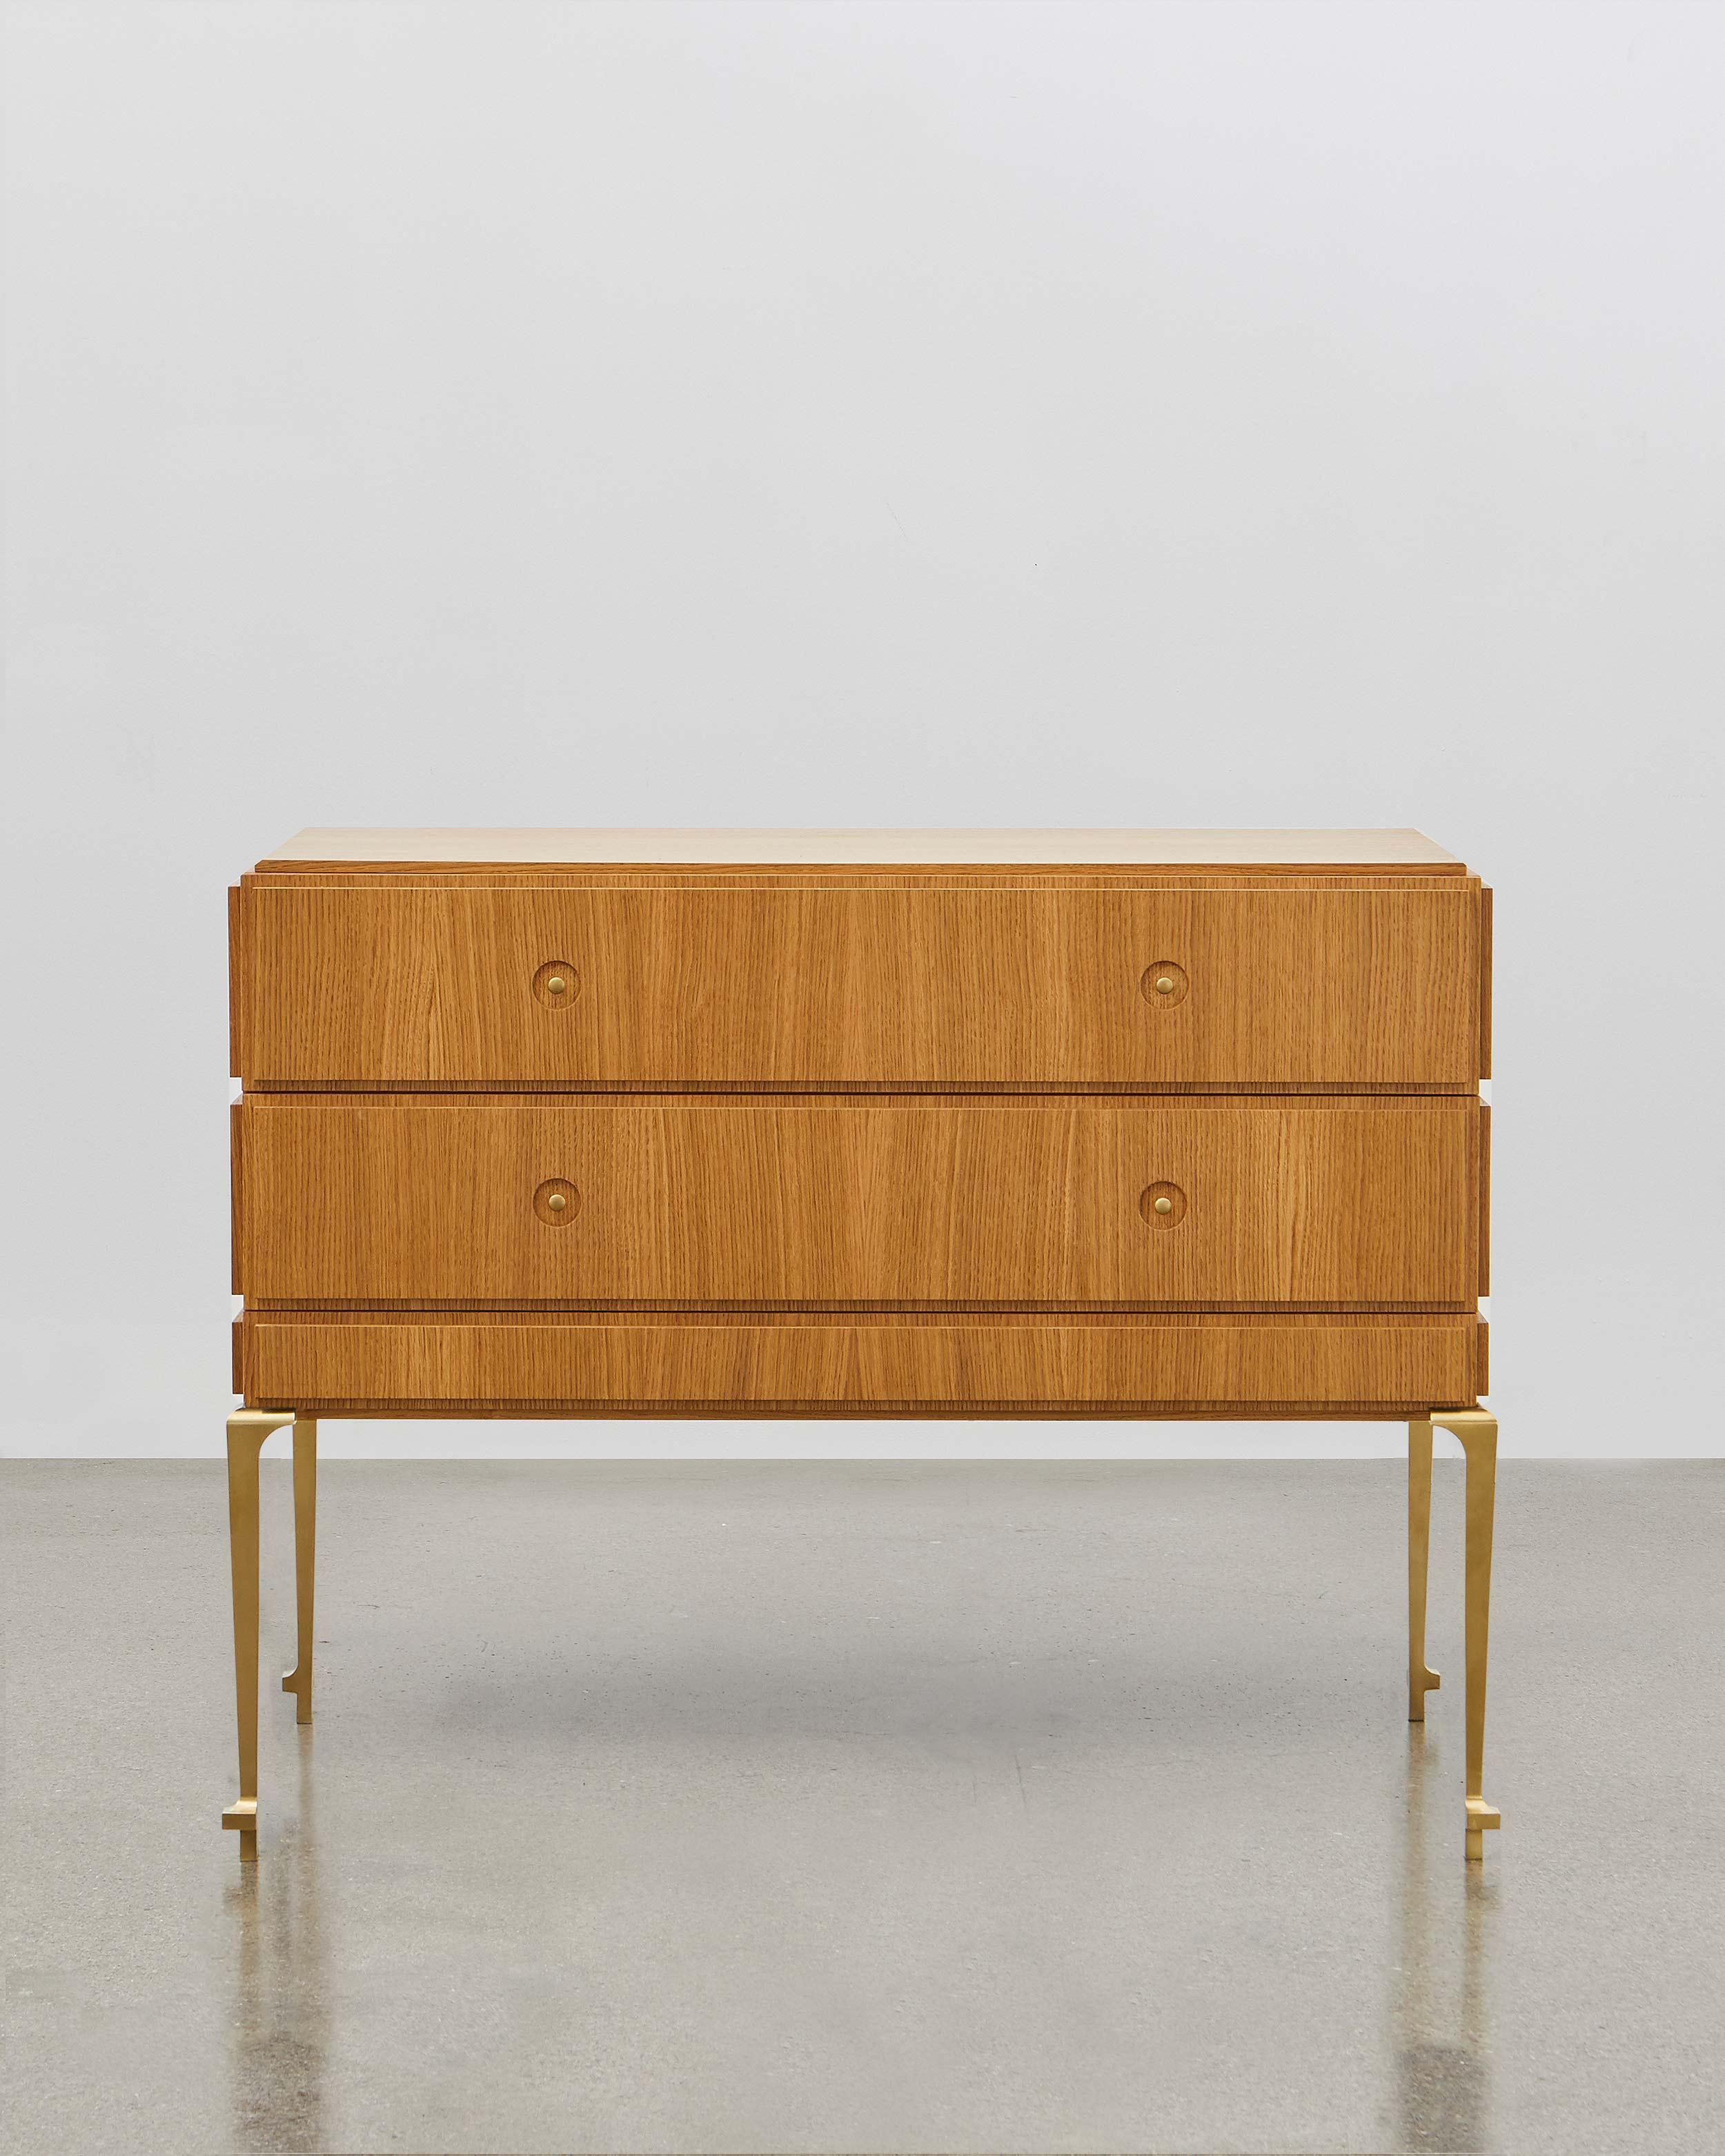 Created so it can be placed in the centre of a room, away from a wall, Poul Henningsen’s grand chest of drawers features wooden panels on all sides. It is designed to be admired and considered from every angle.

This piece highlights the